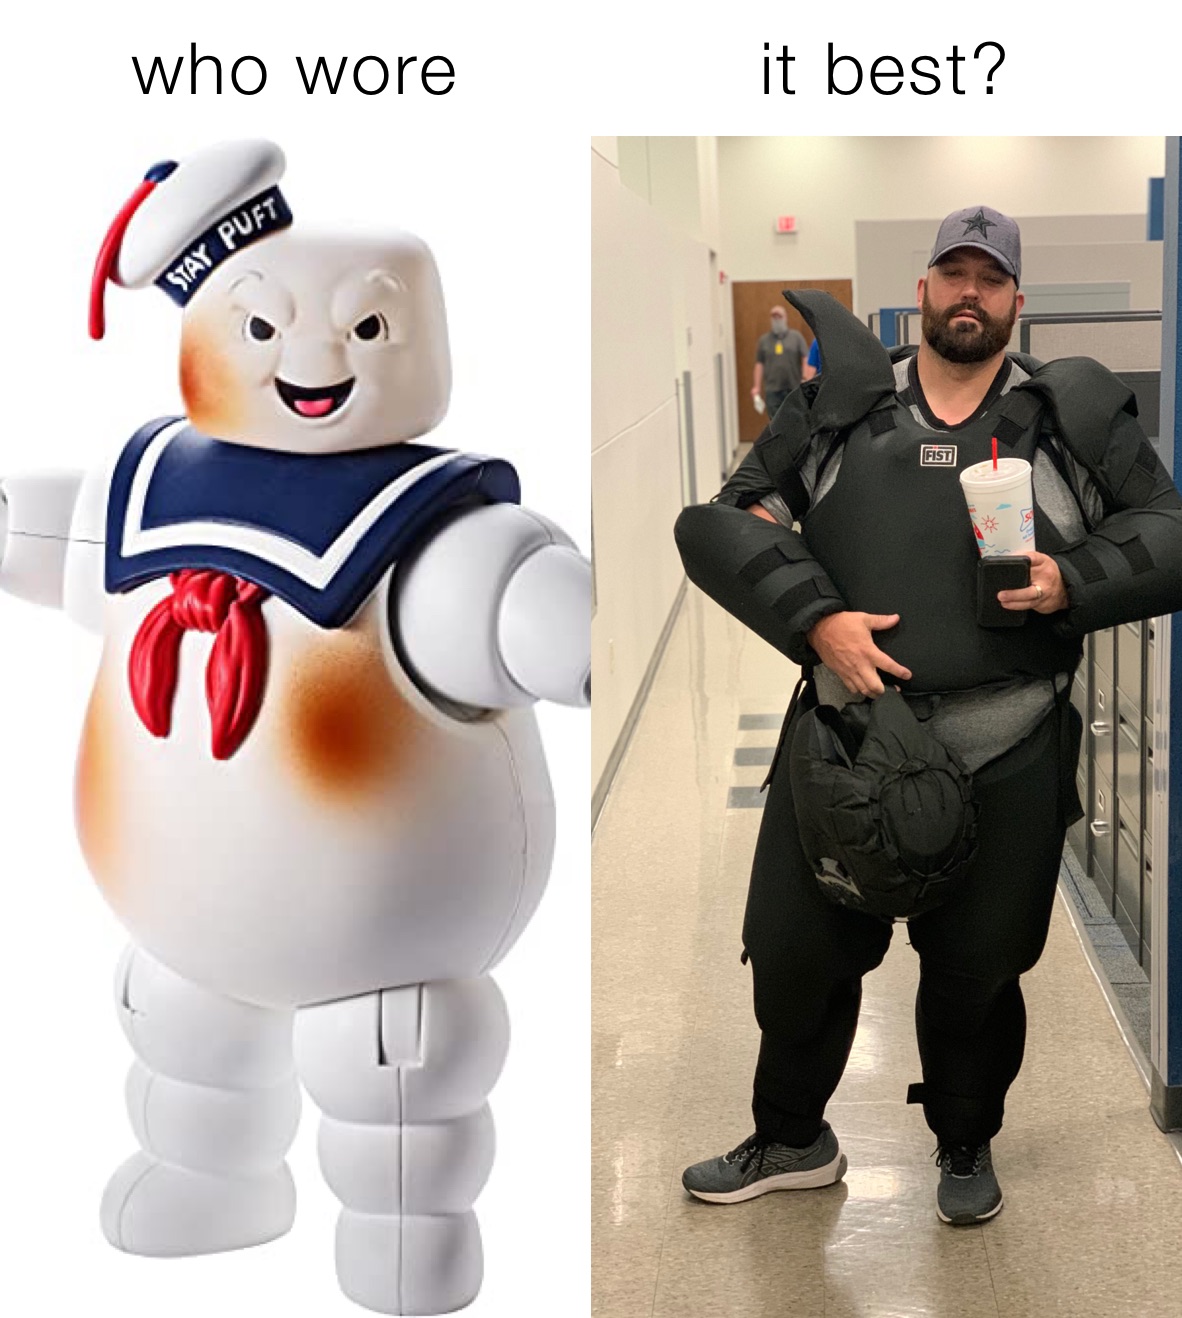 who wore it best?